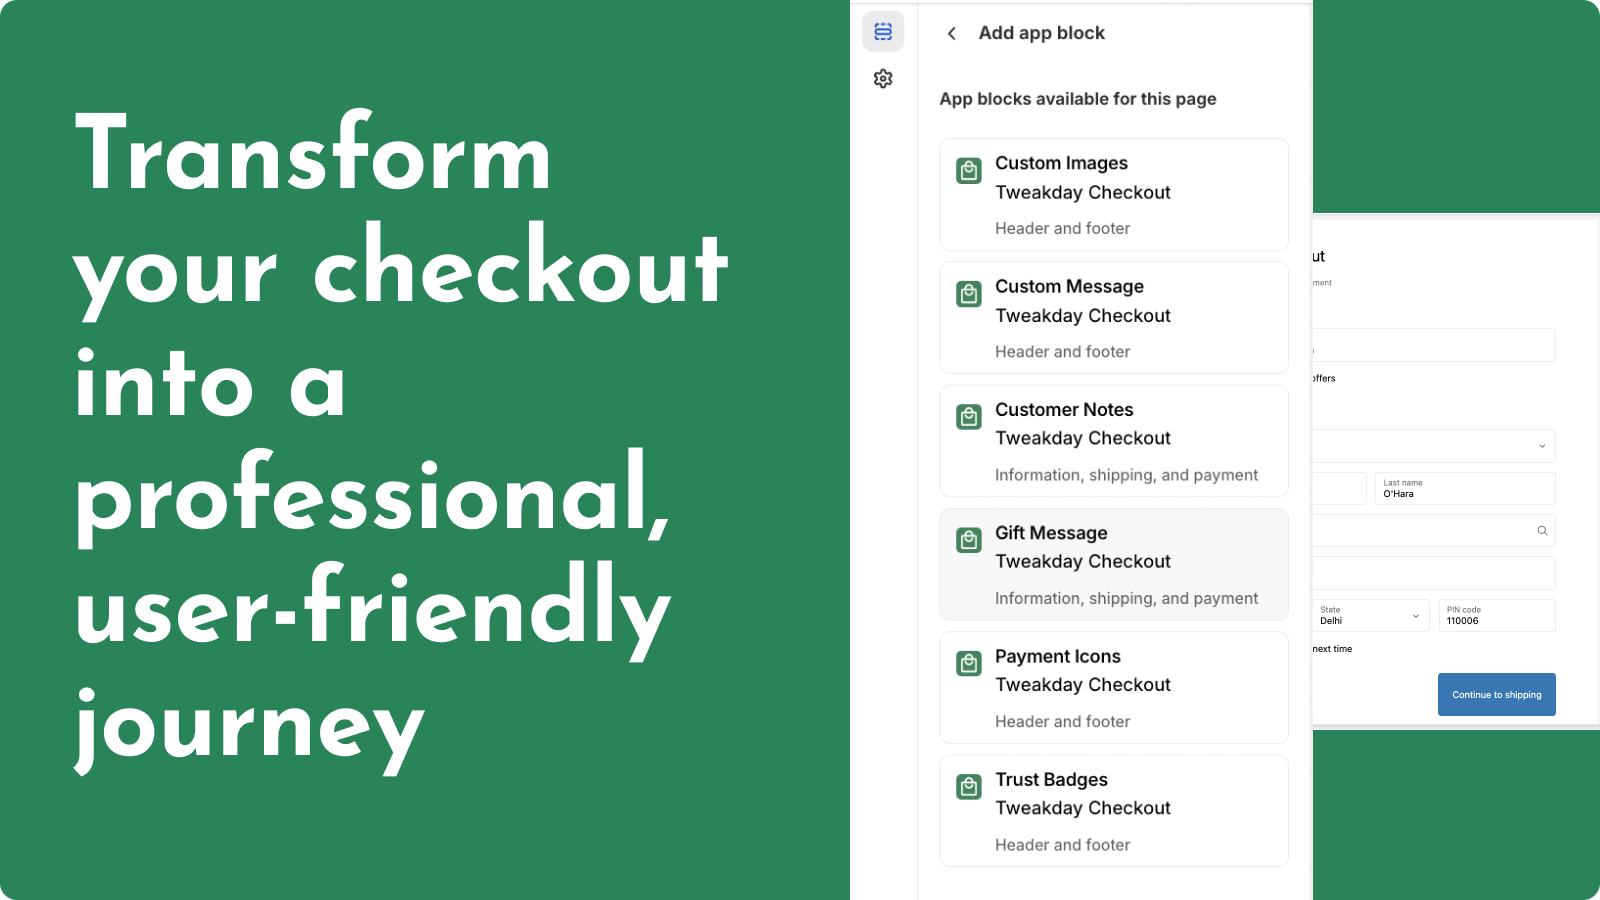 Transform your checkout into a professional journey